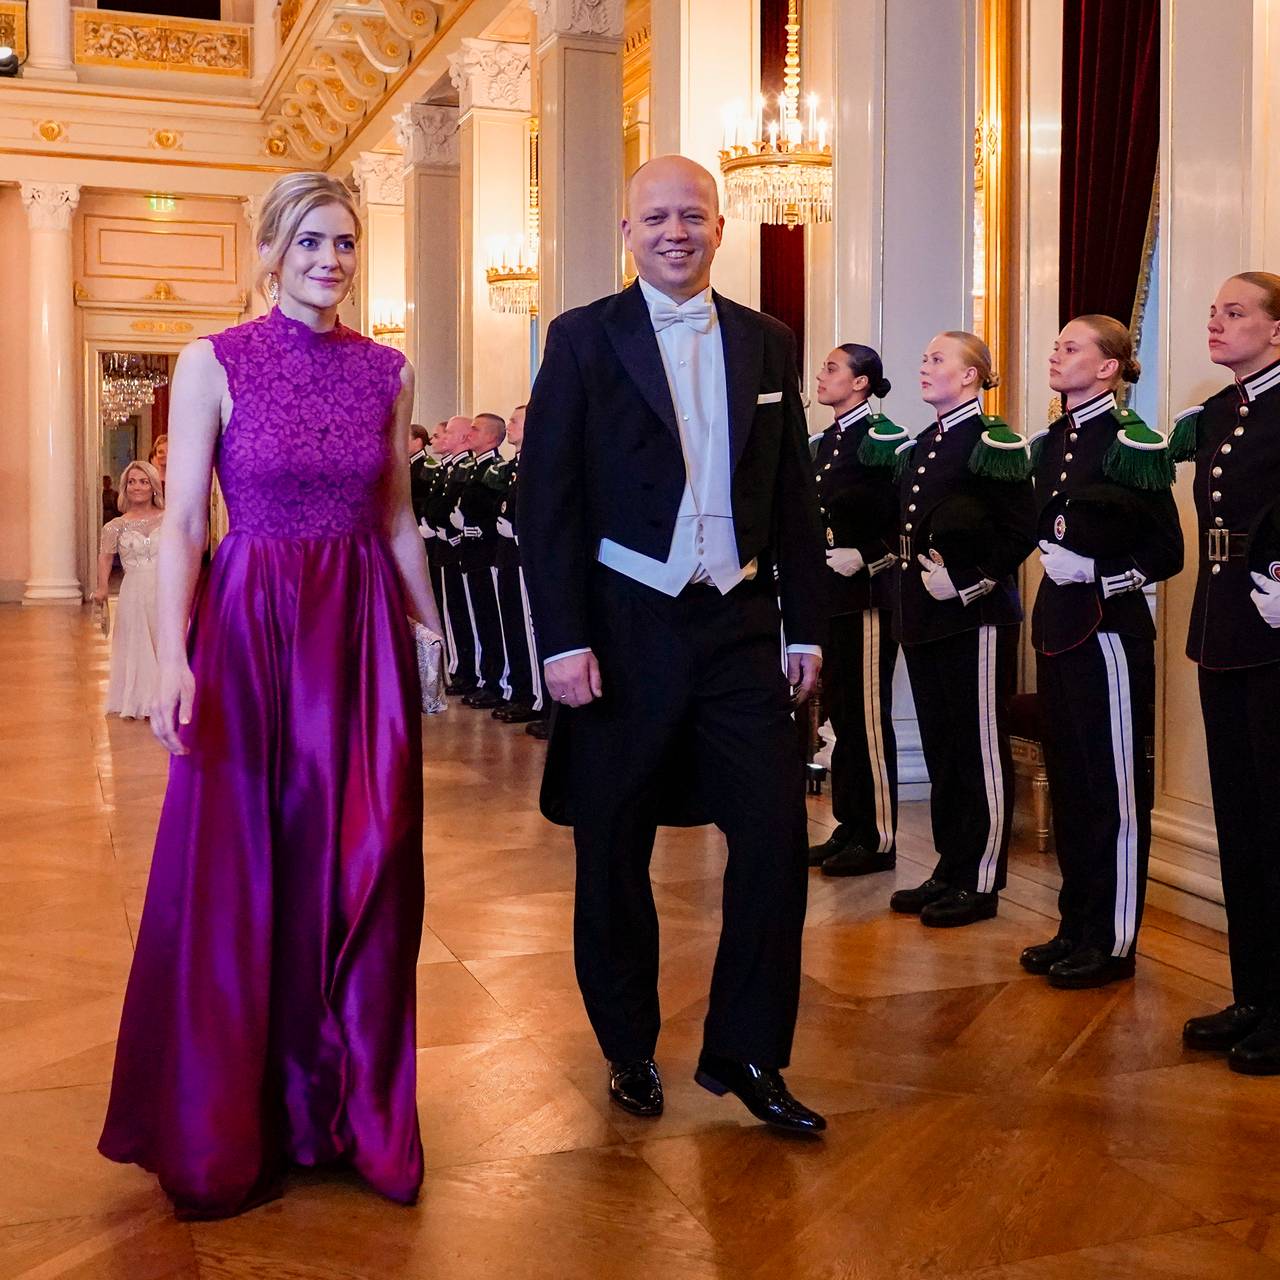     Emilie Enger Mehl and Trygve Vedum Slagsvold go in a parade through the large banquet hall for the gala dinner 